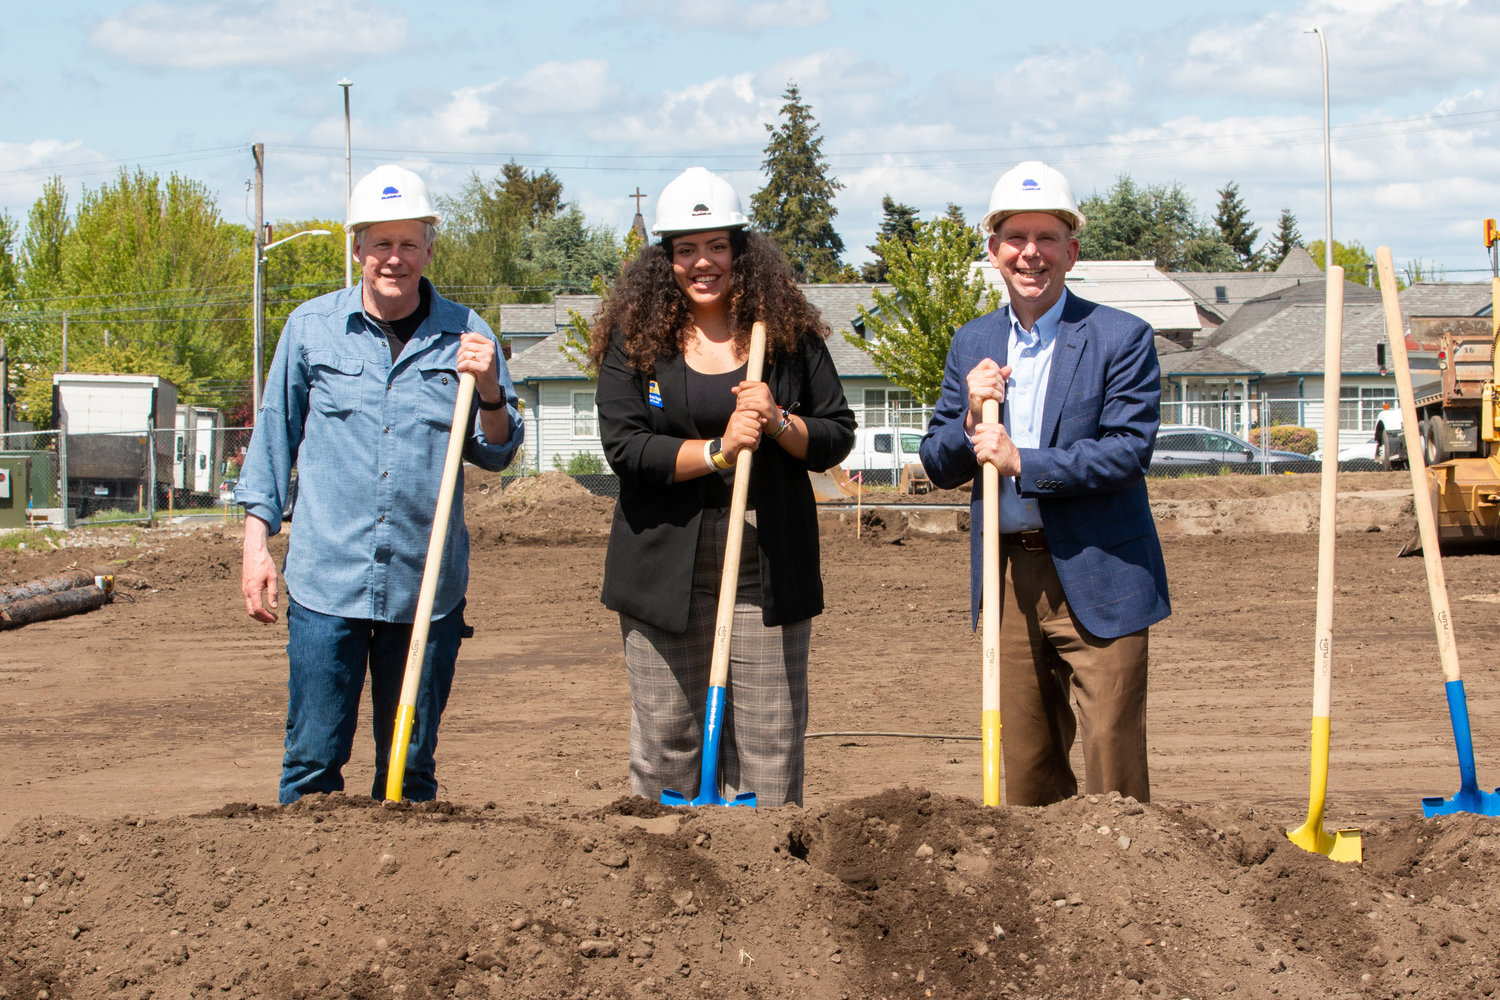 Court Stanley, Board of Trustees member since 2020; Marisol Vargas, Student Body President; and Mark Scheibmeir, Board of Trustees member since 2017, pose for a photo as the give a ceremonial groundbreaking for the Centralia College Multi-purpose Athletic Field Wednesday afternoon.